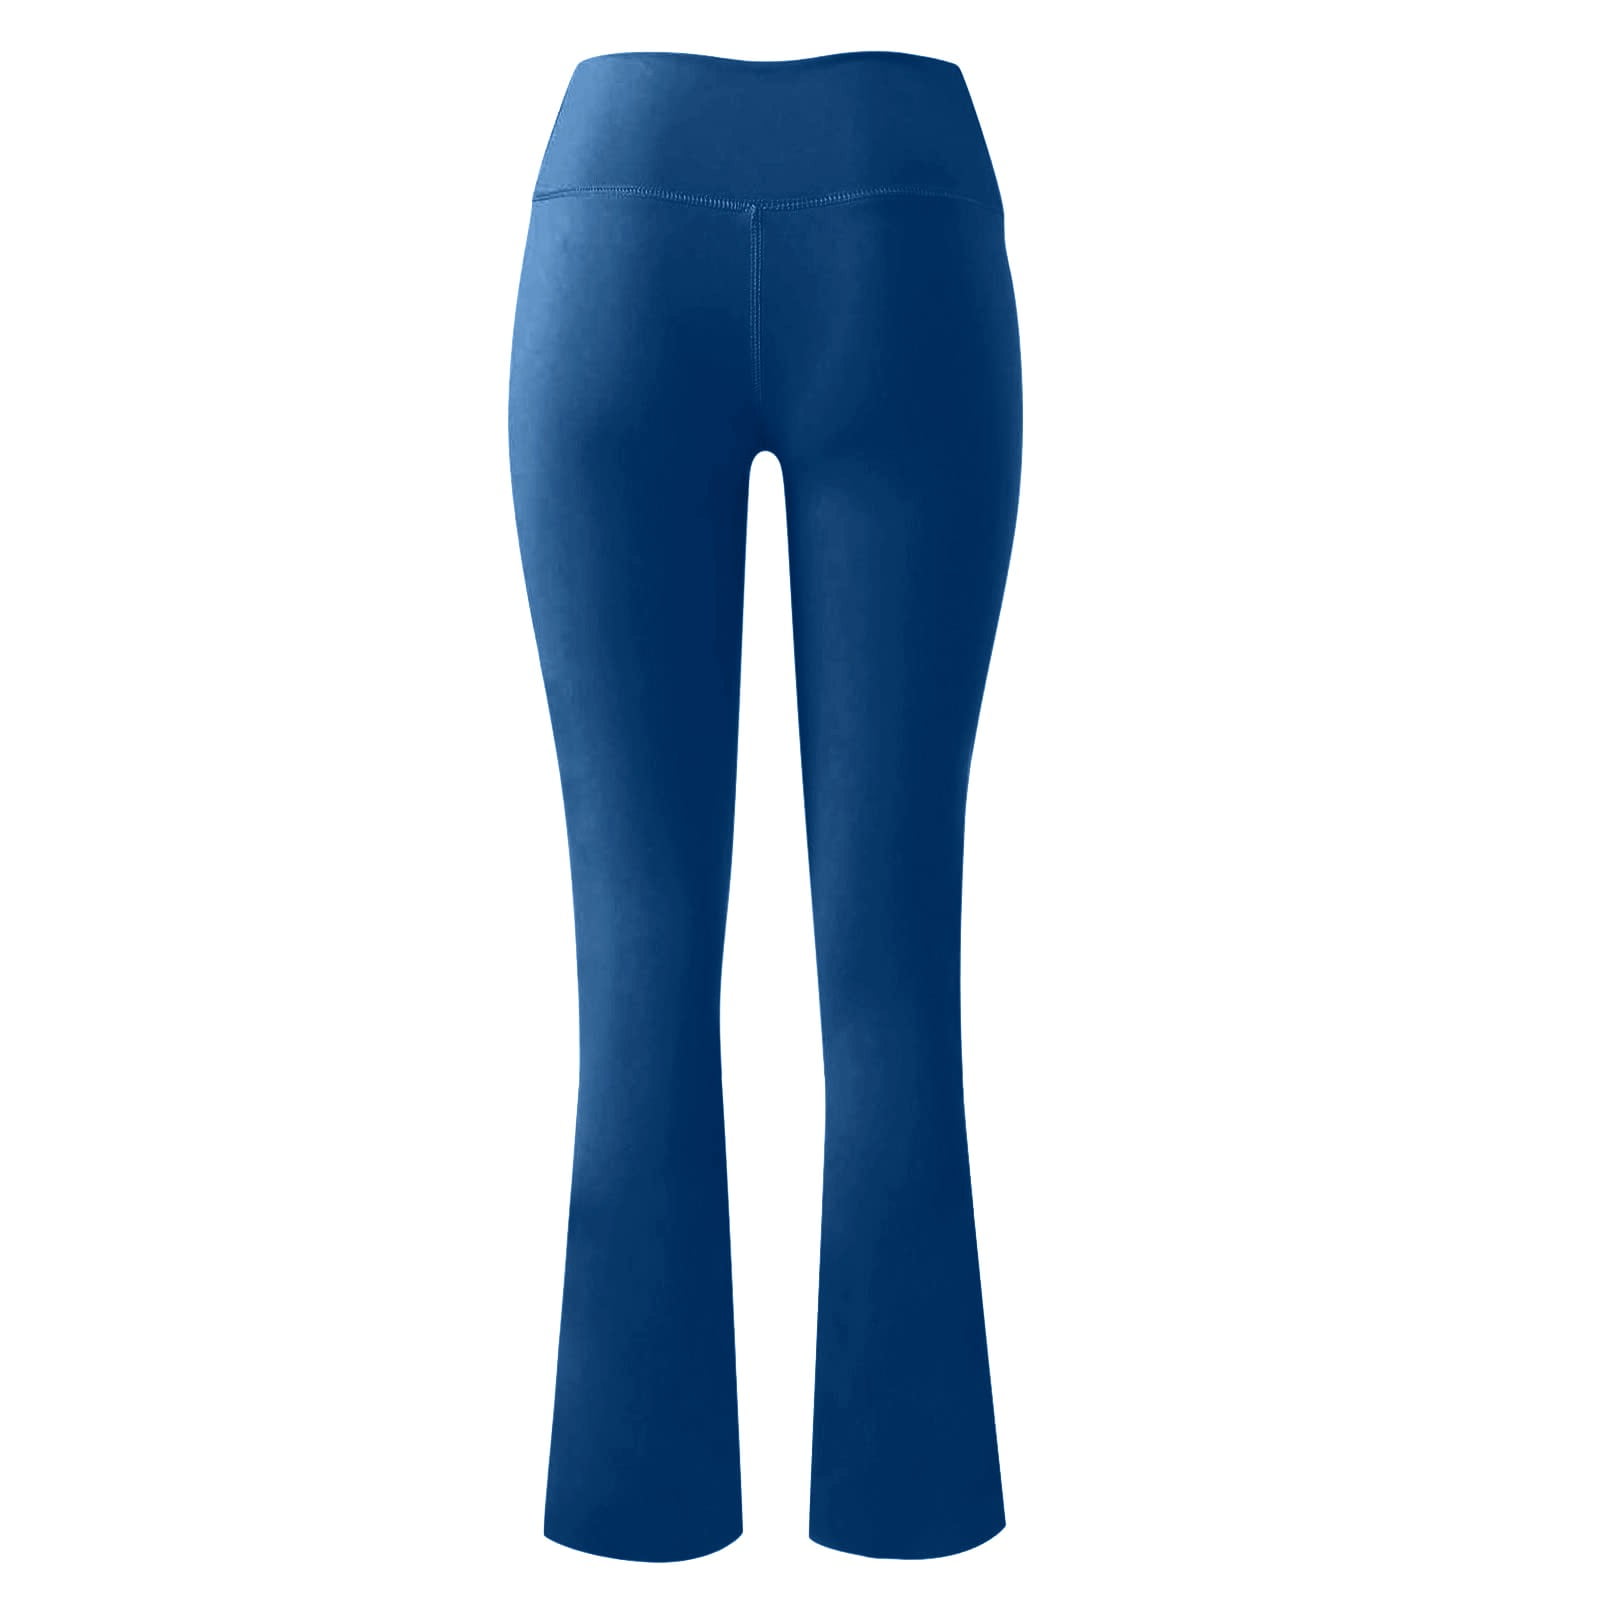 Womens Flare Leggings Bootcut Flare Yoga Pants Crossover Flared Leggings  Bootleg Pants Workout Cute Flair Leggings (Color : Blue, Size : XX-Large)  price in UAE,  UAE